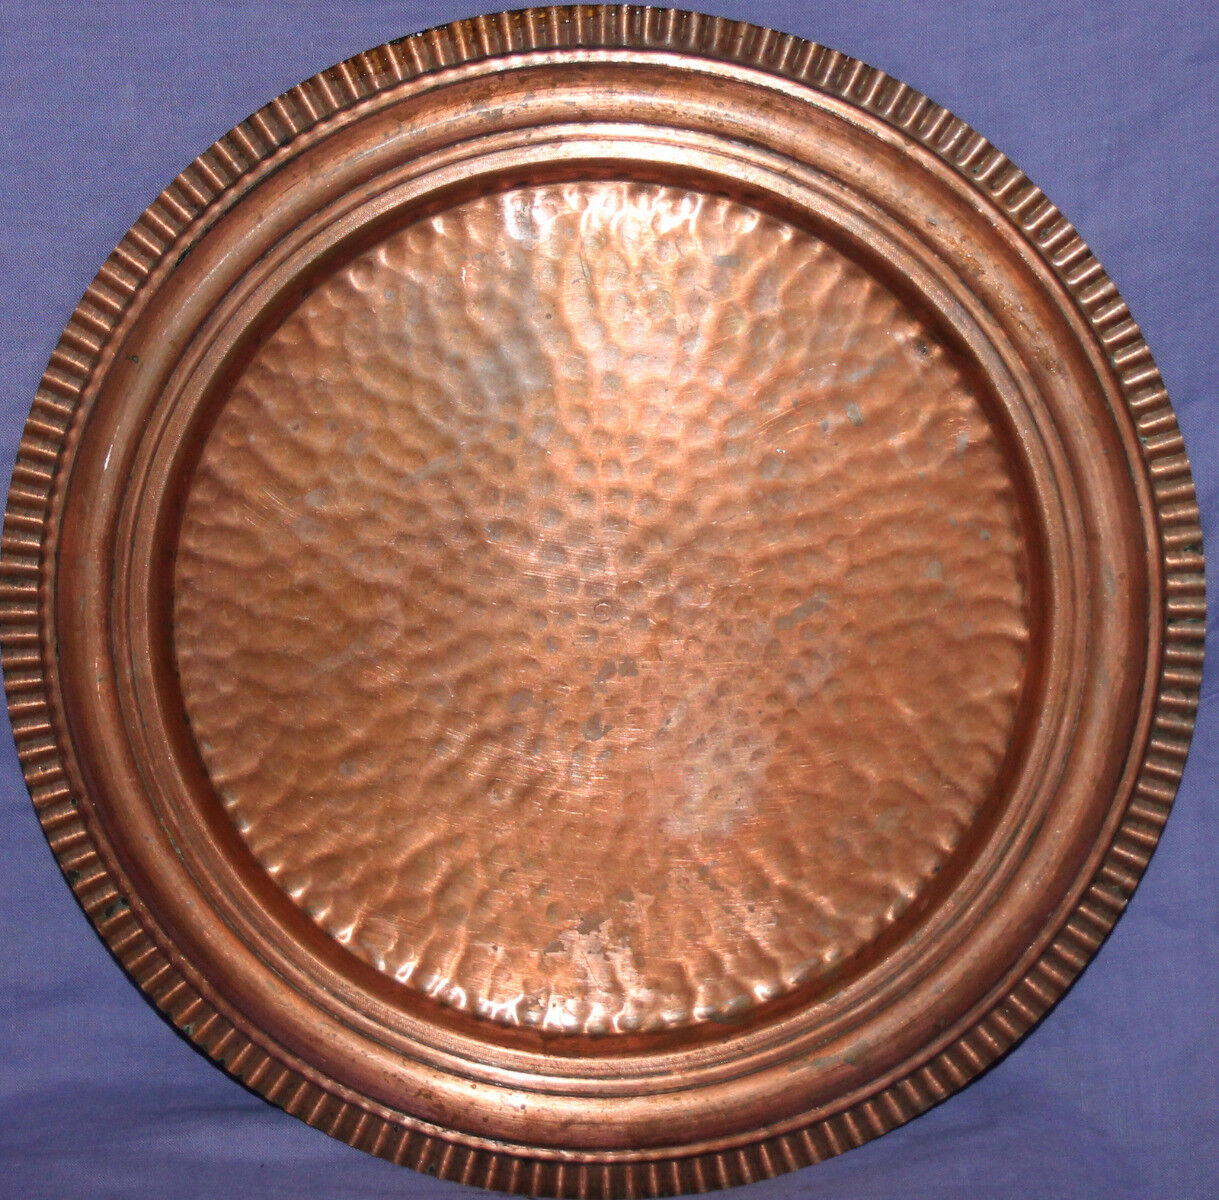 Vintage hand made ornate serving tray